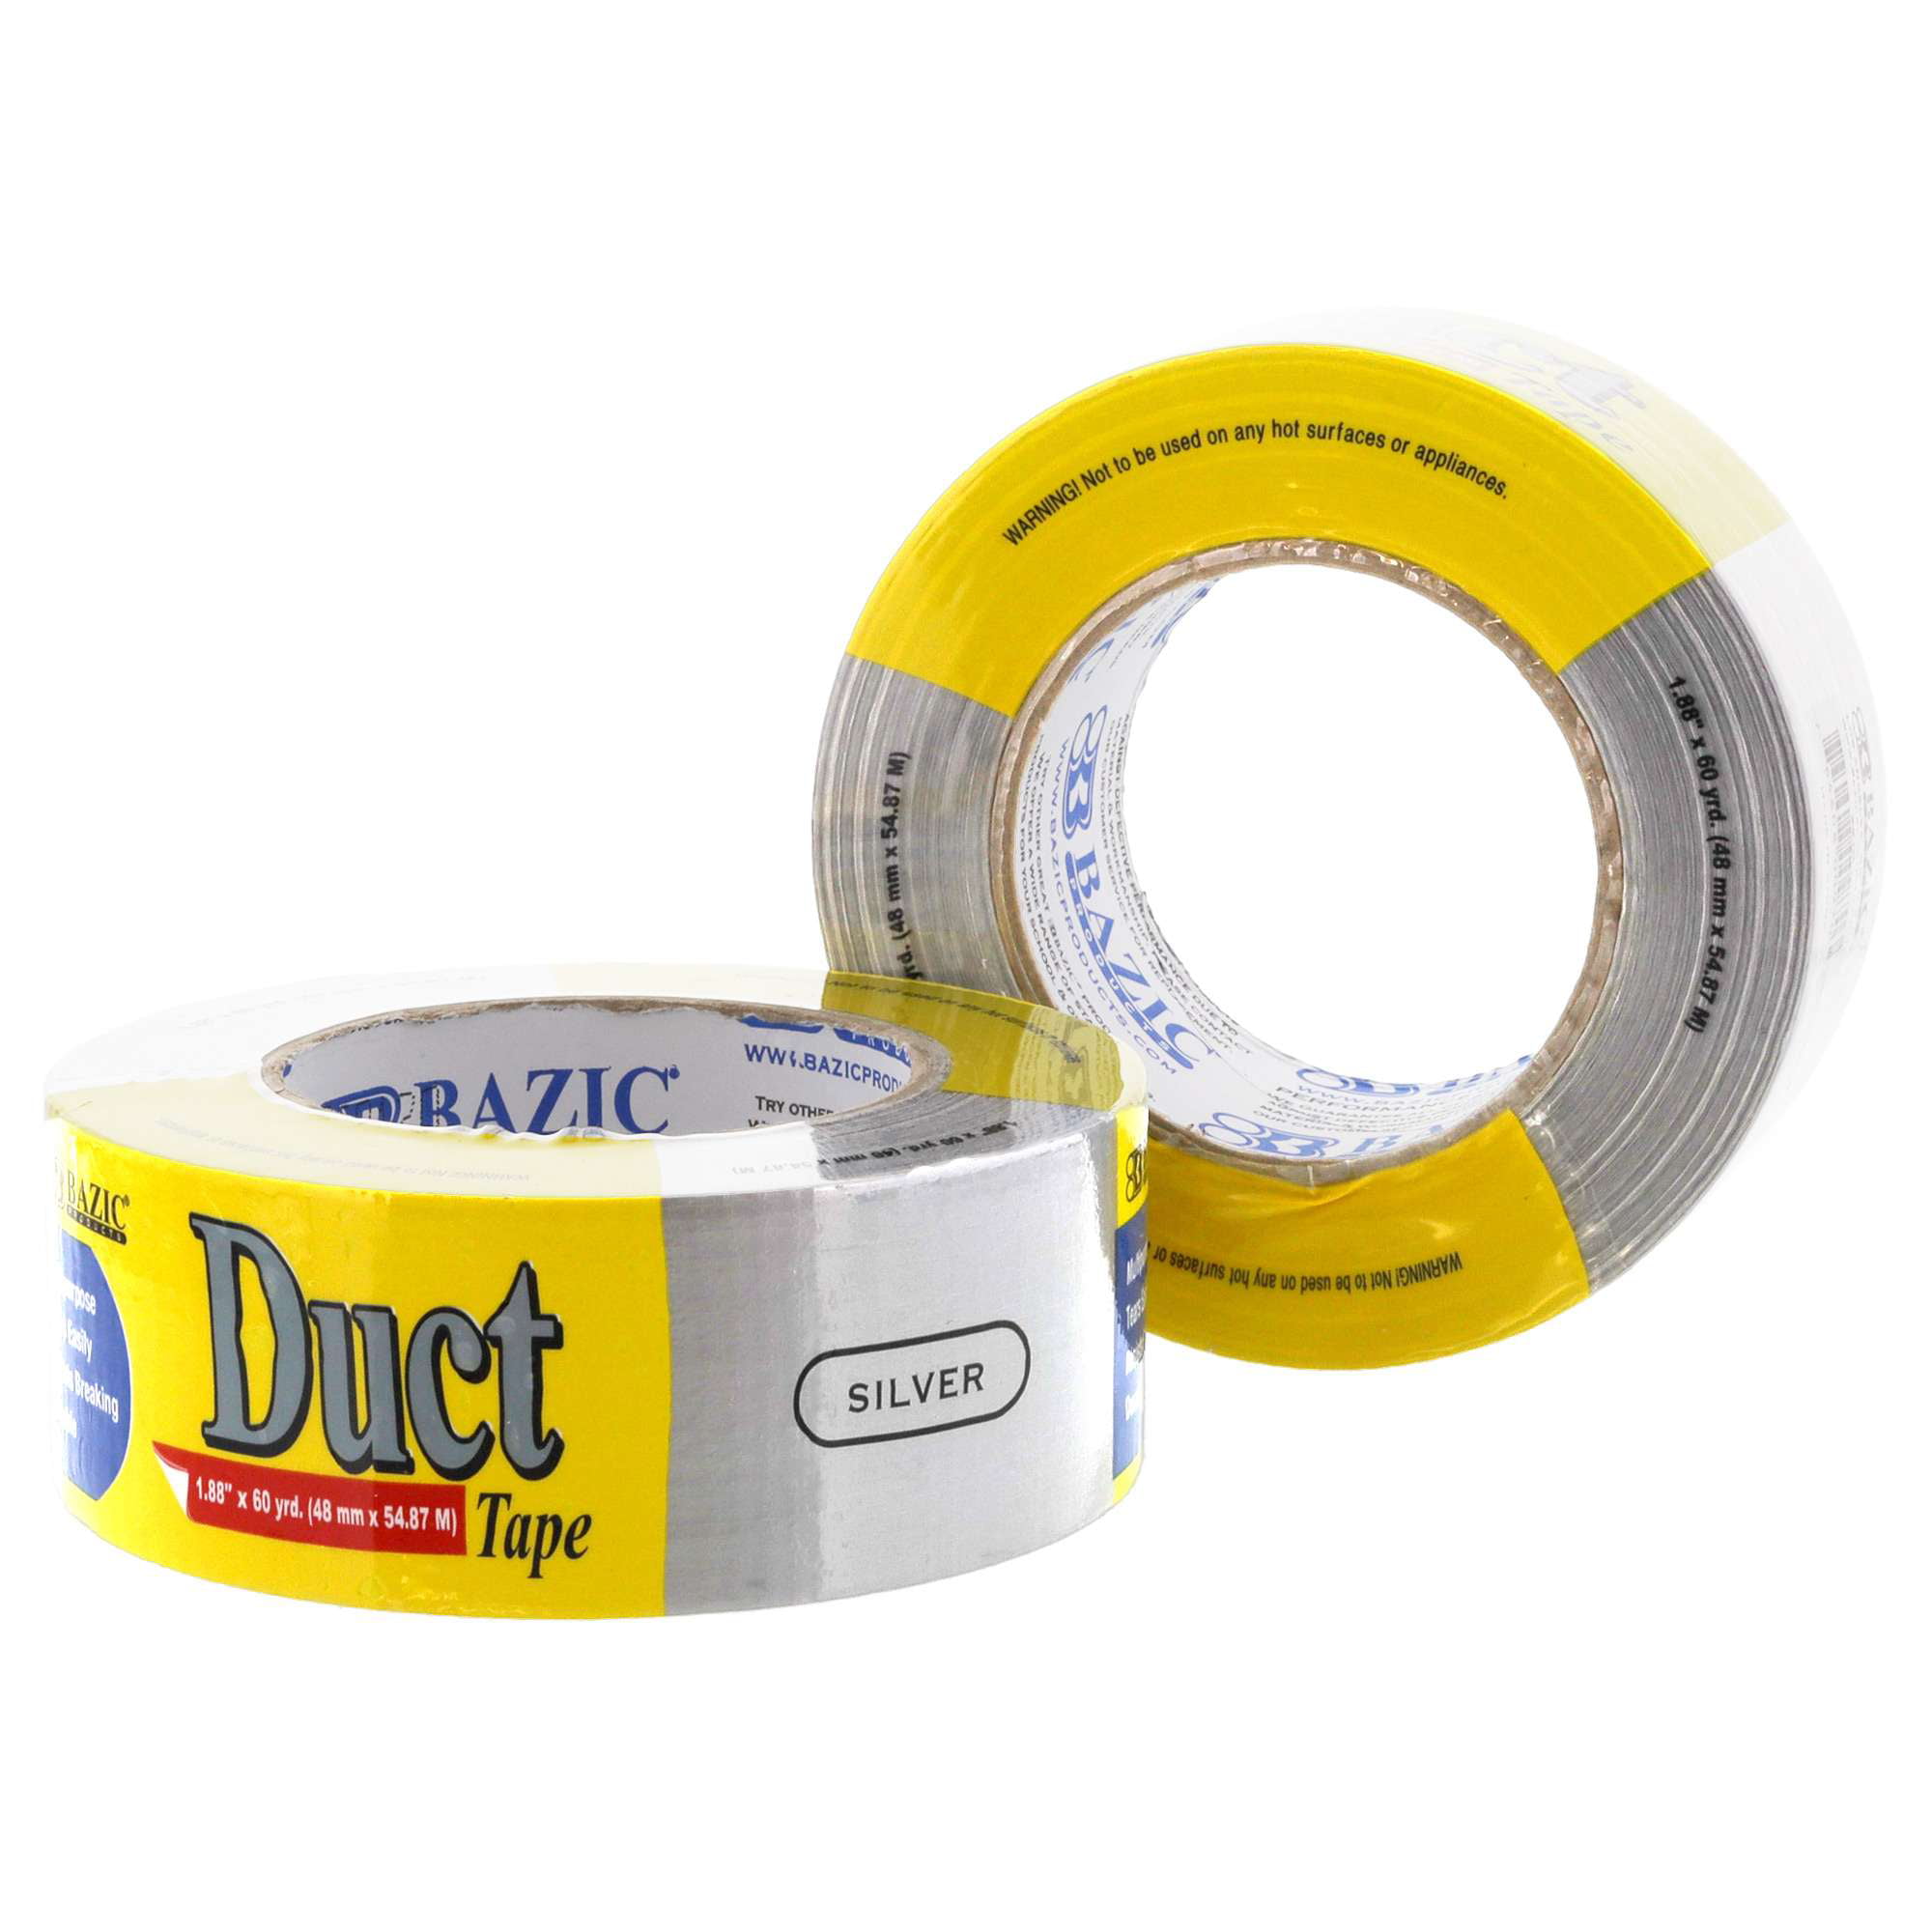 NEW INTERTAPE 2X 60YD LARGE ROLL YELLOW HEAVY DUCT TAPE 